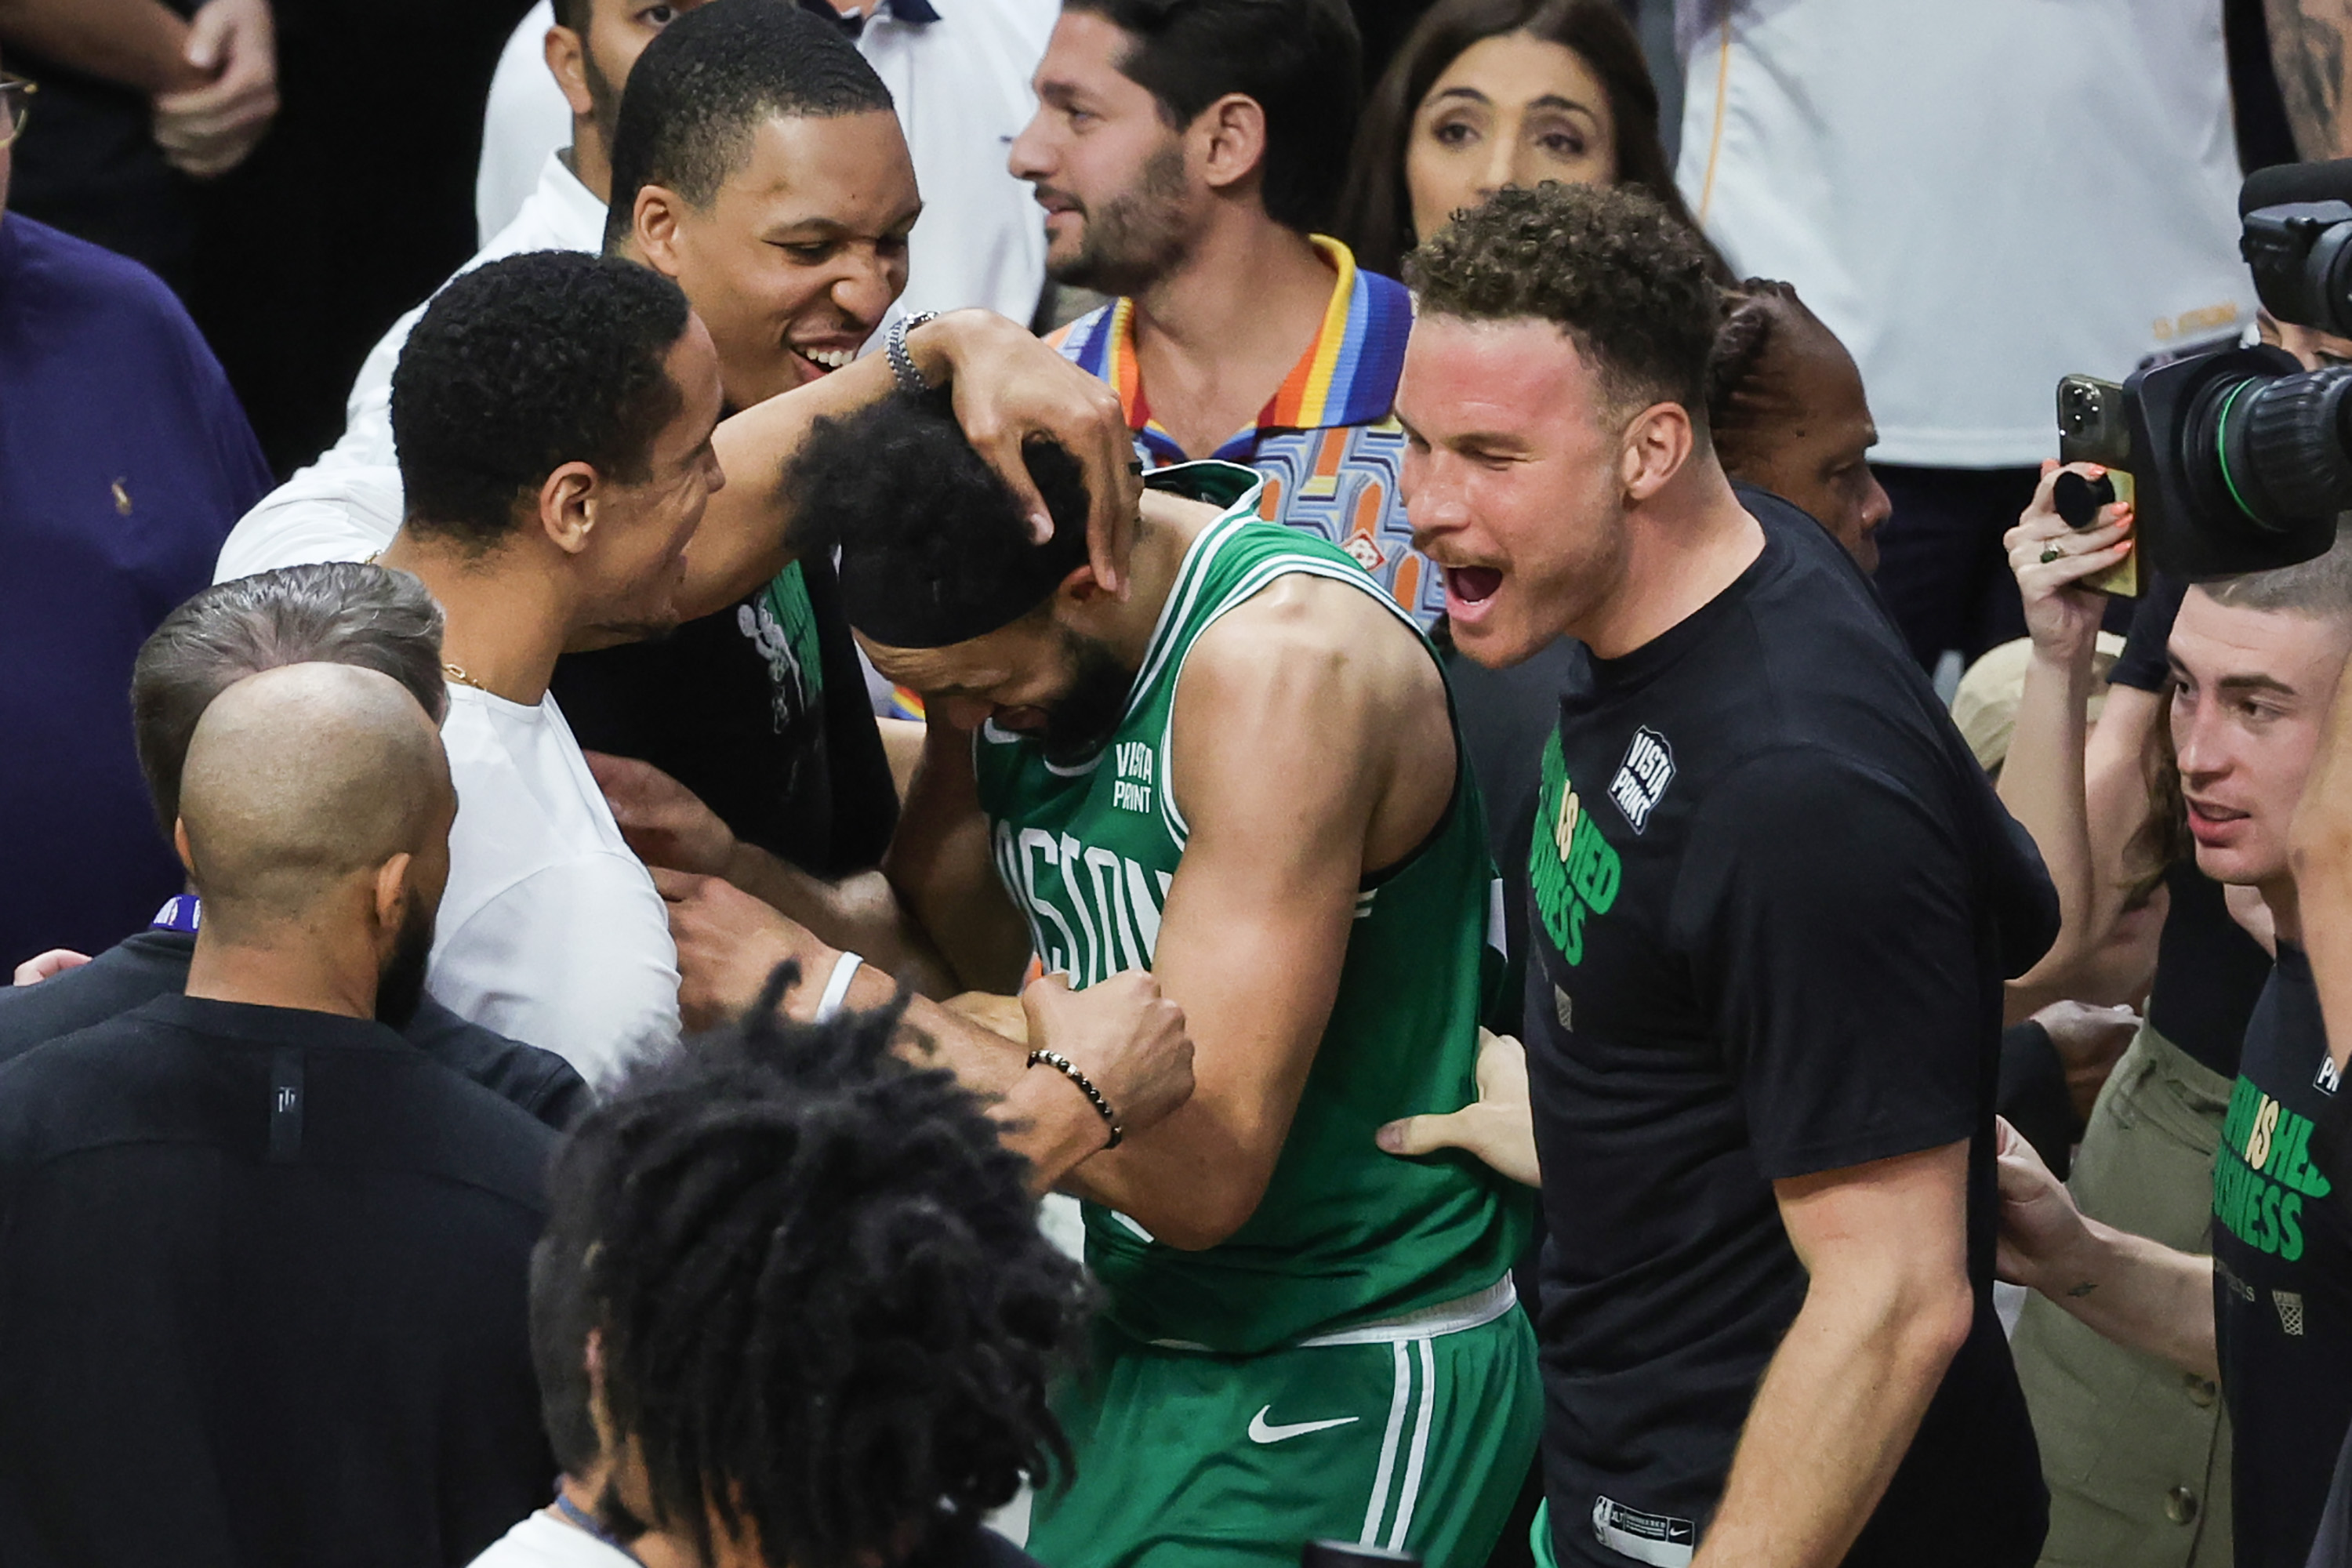 White's putback as time expires lifts Celtics past Heat, forces Game 7 in  East finals